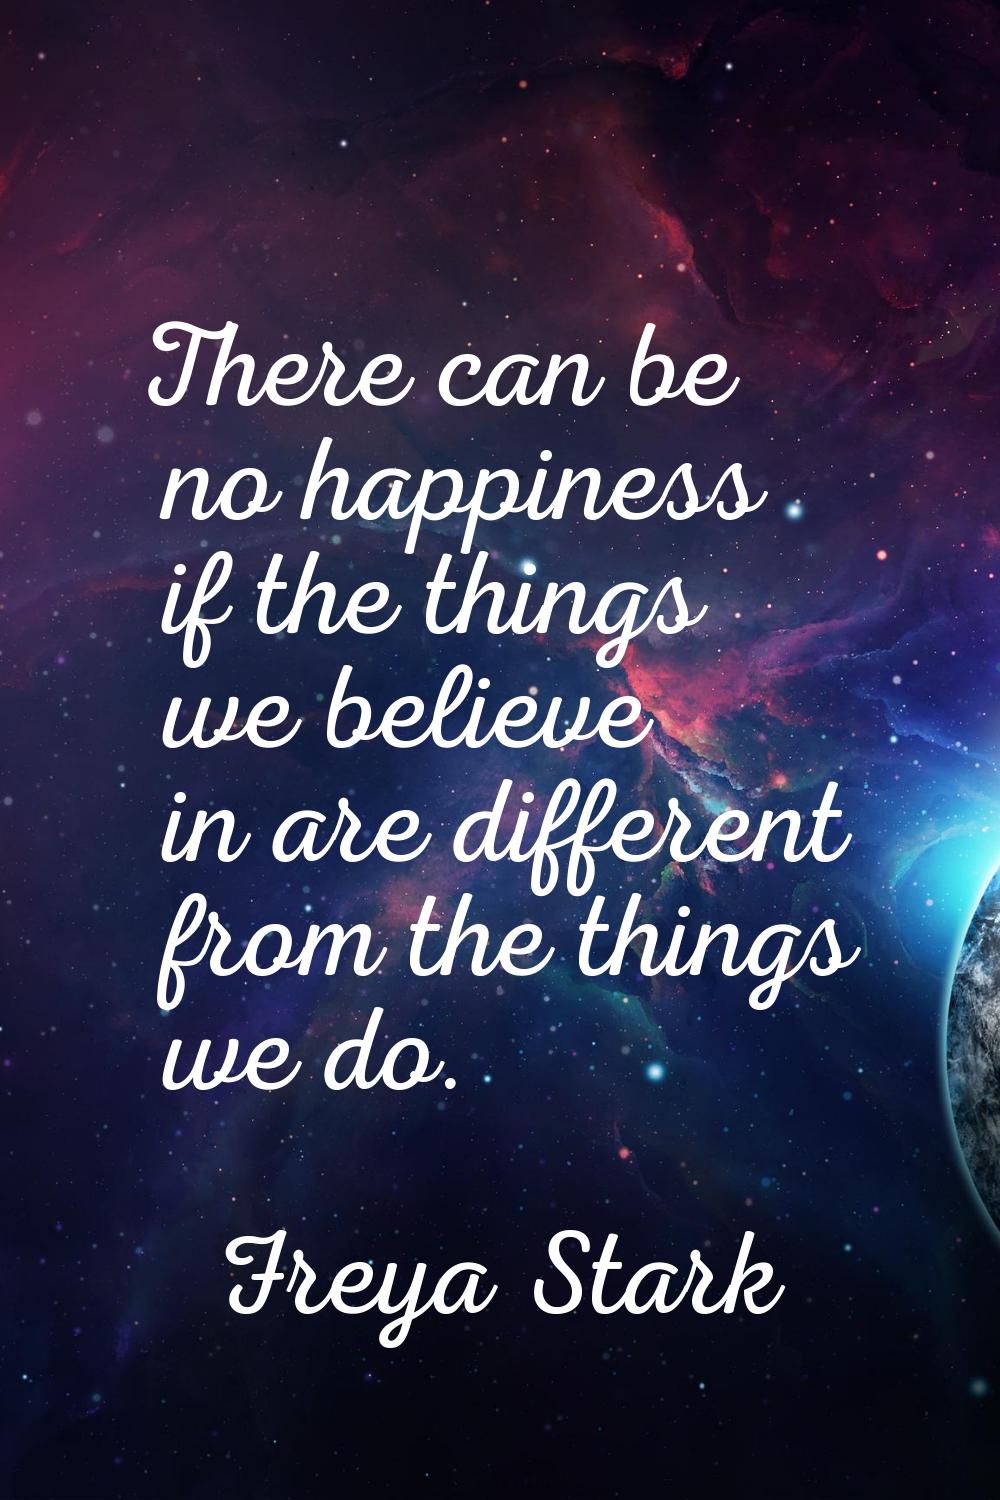 There can be no happiness if the things we believe in are different from the things we do.